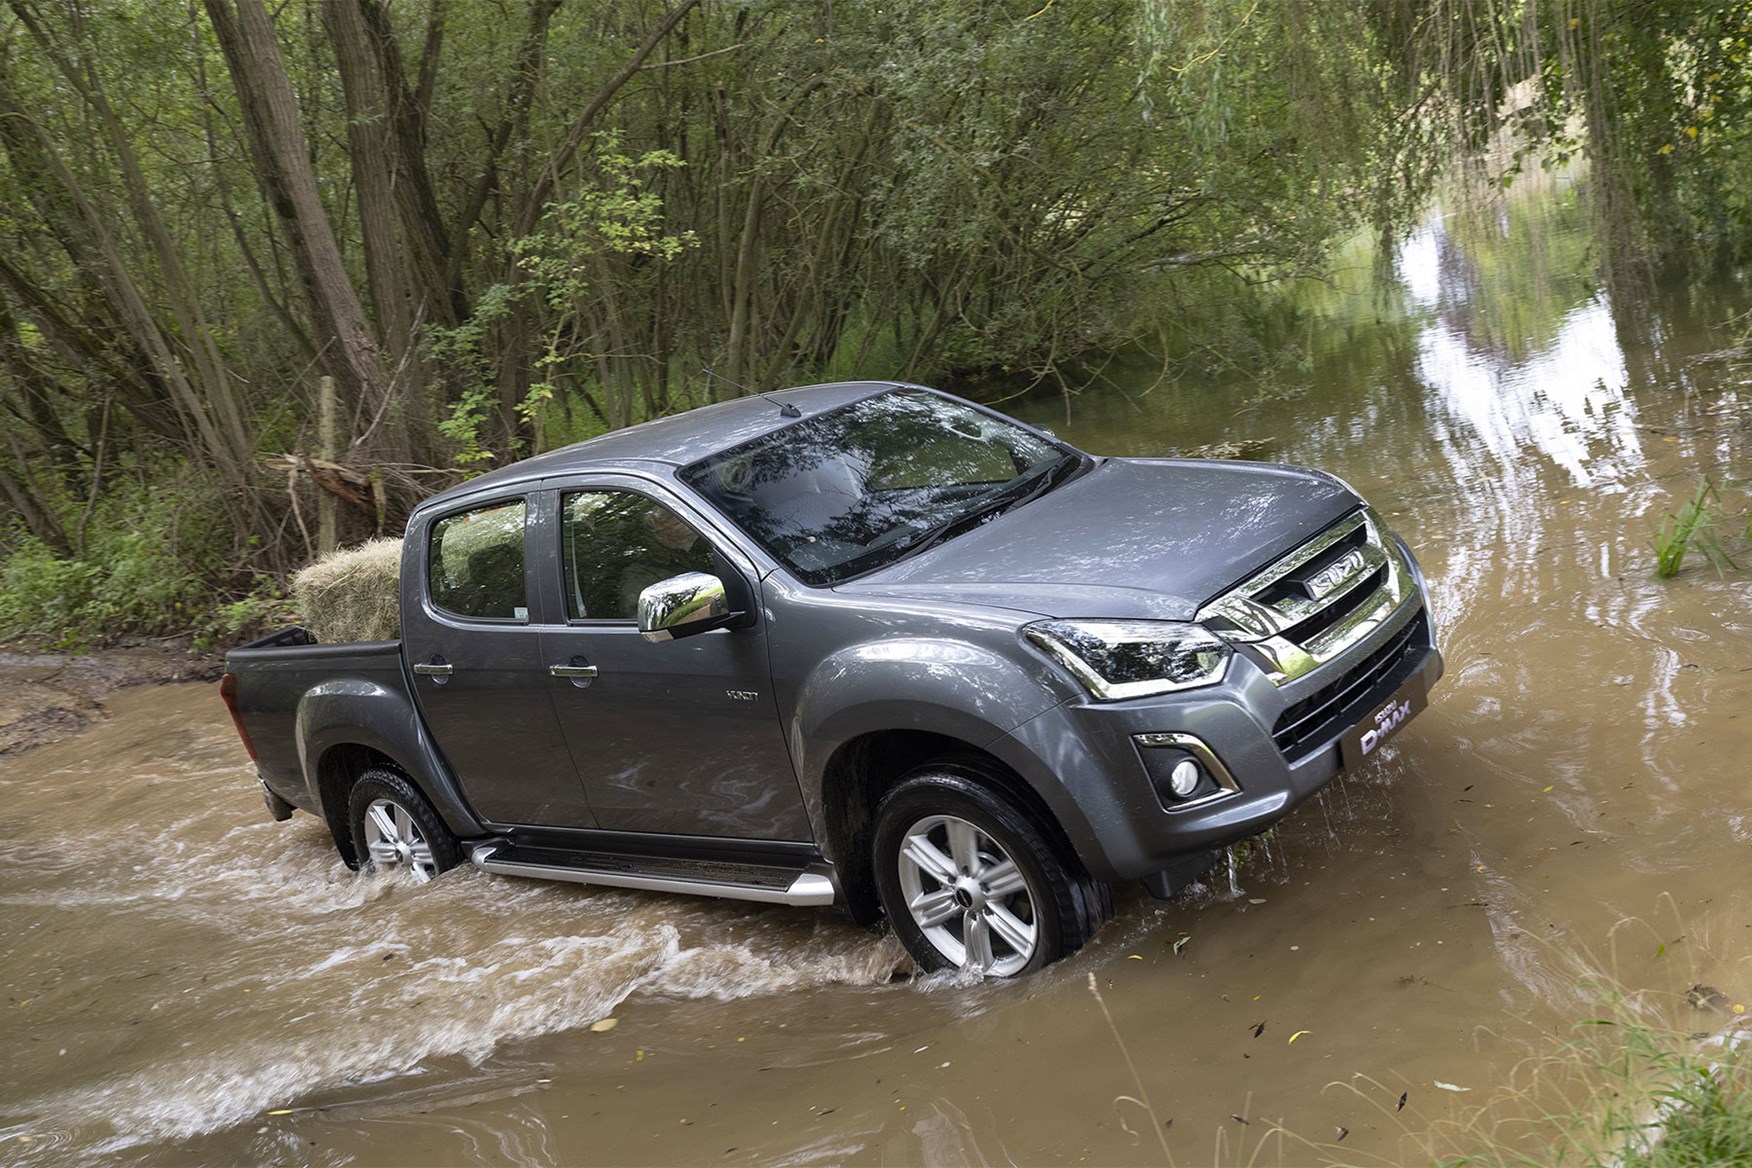 Isuzu D-Max off-road - splashing through river with hay bale in load area